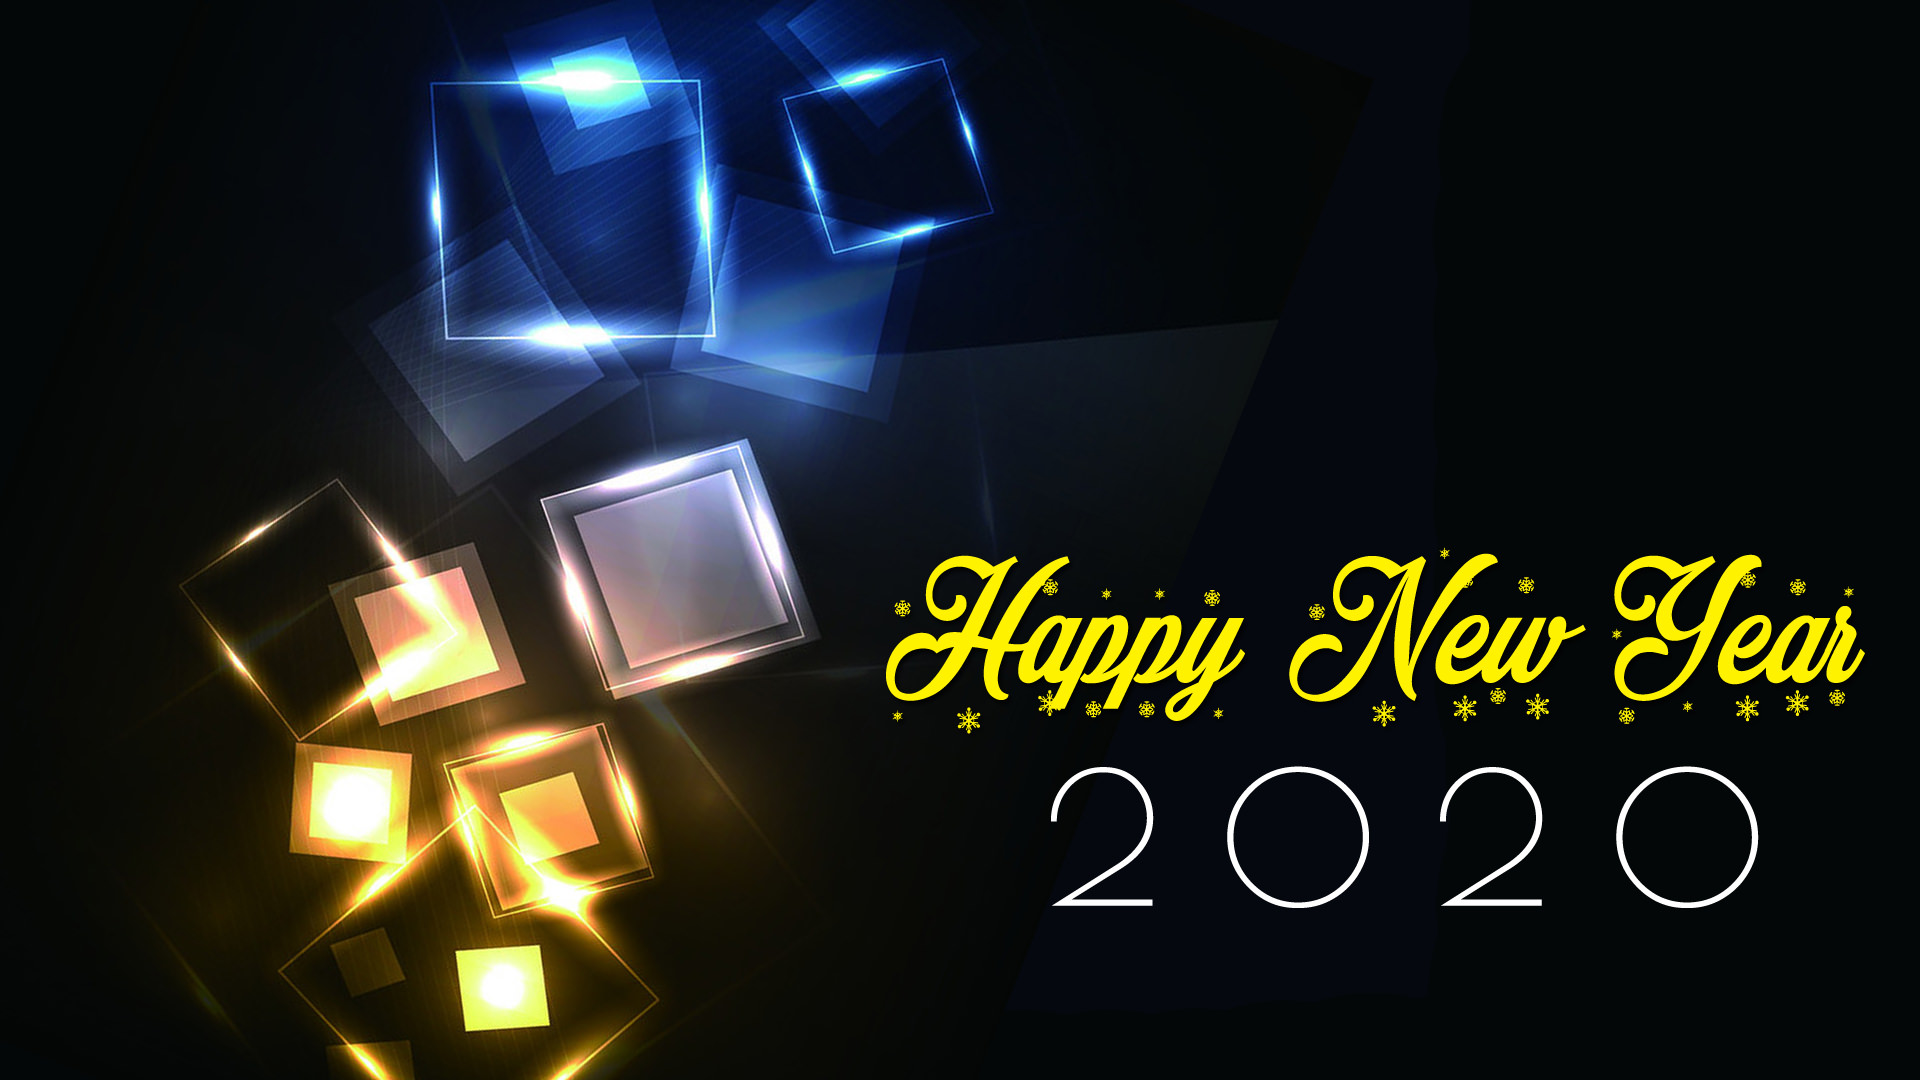 Lighting 2020 Happy New Year Wallpapers - New Year 2020 Images Hd - HD Wallpaper 